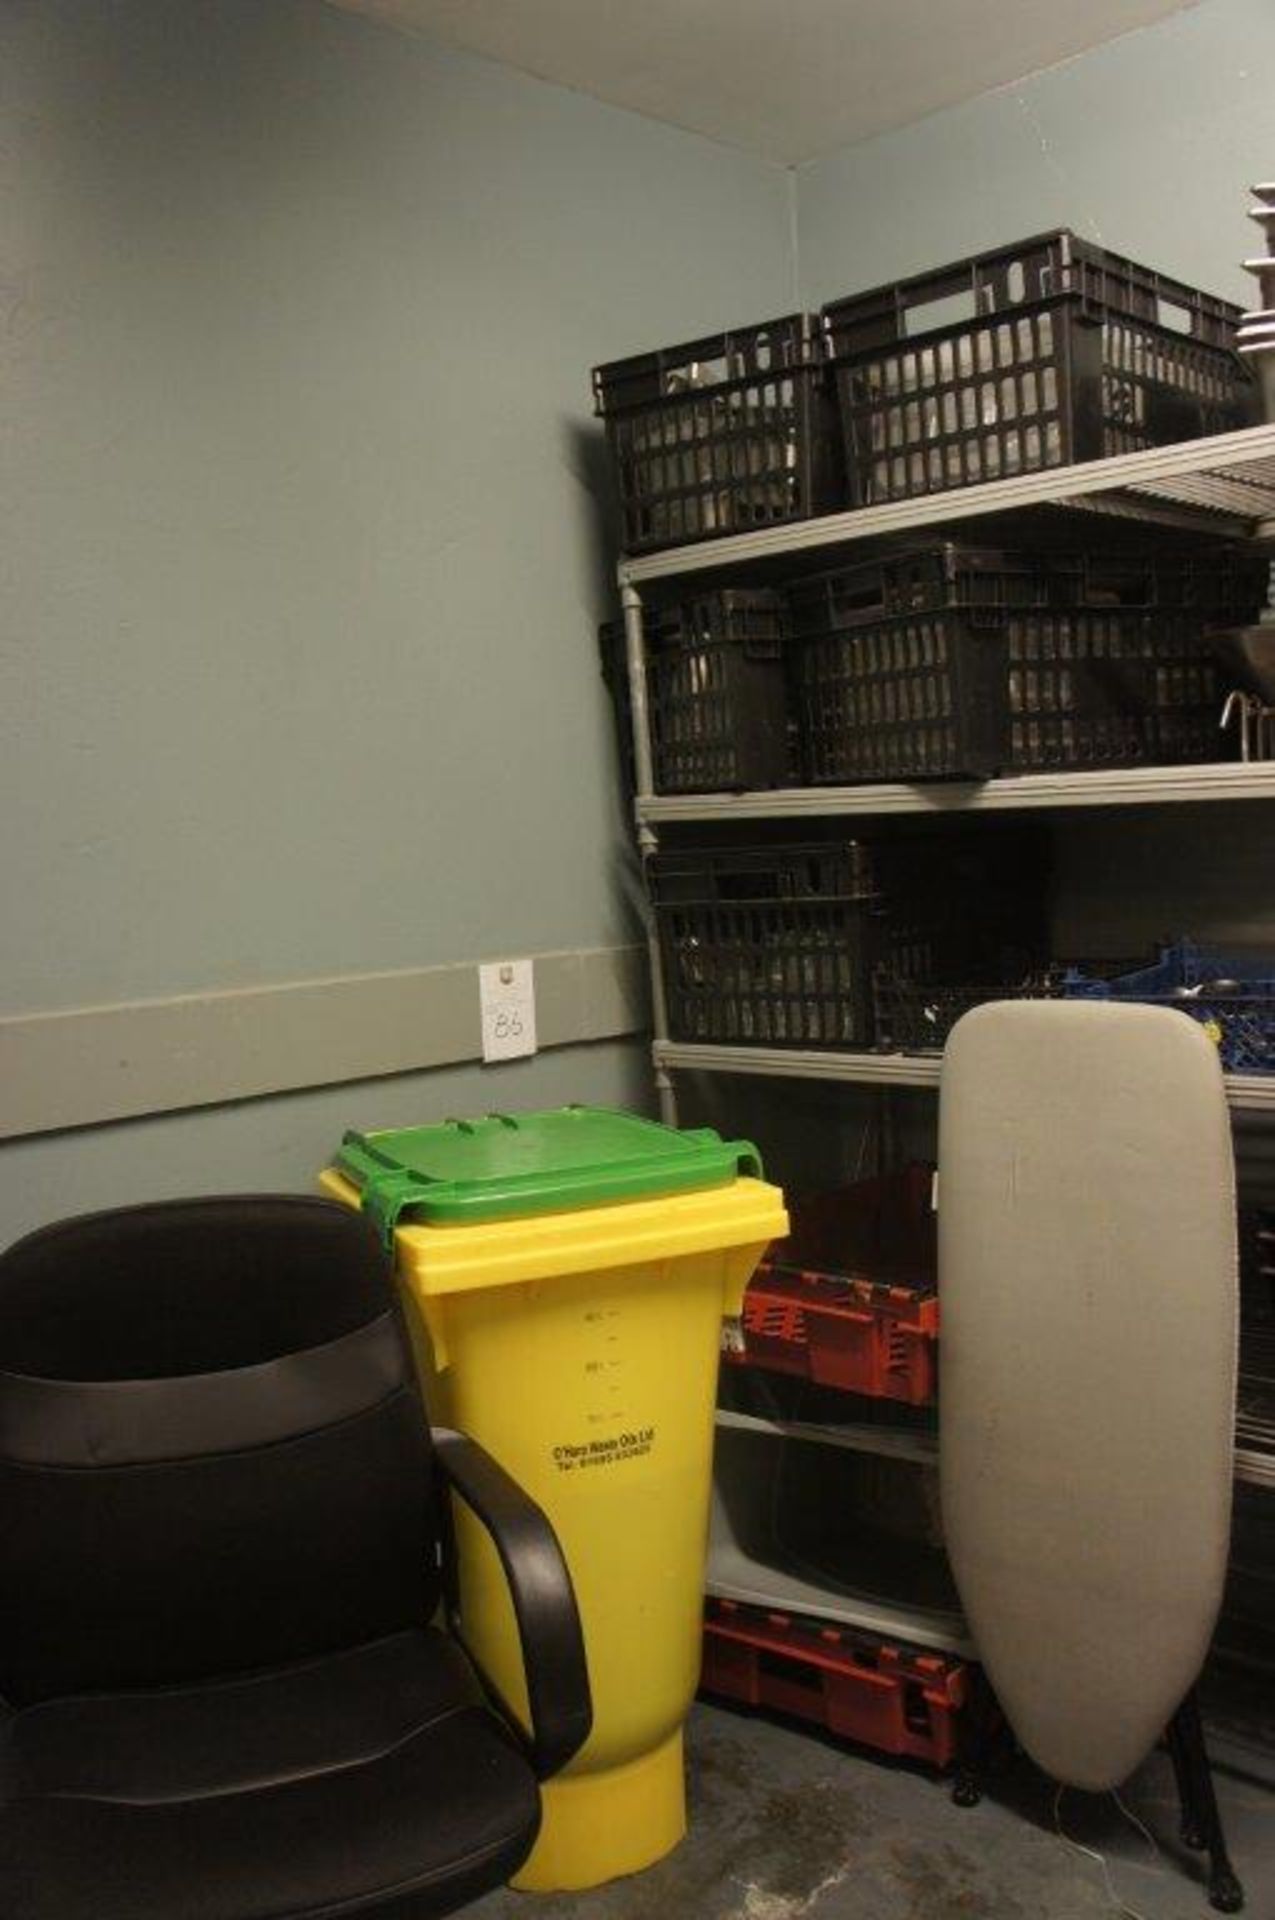 The contents of the service lift area - Image 4 of 7